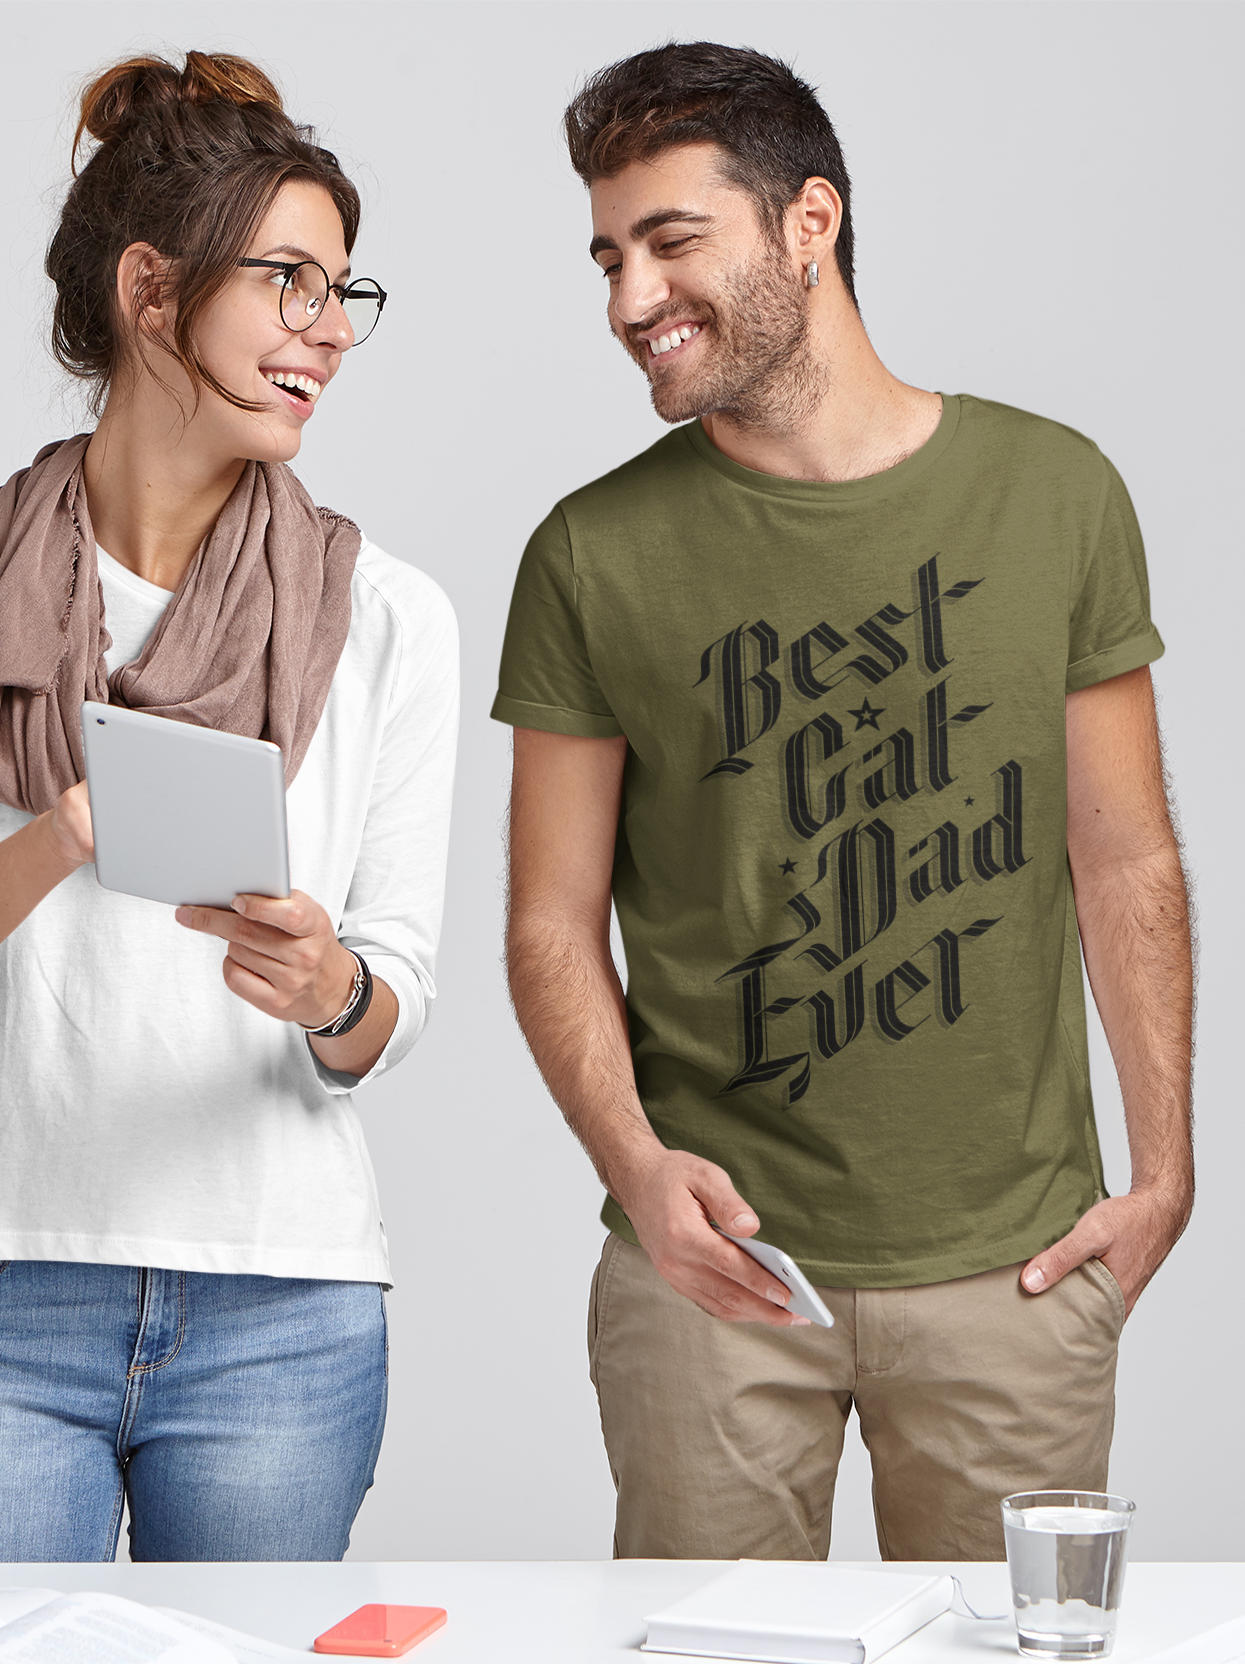 Sophisticated Best Cat Dad Ever Graphic Tee